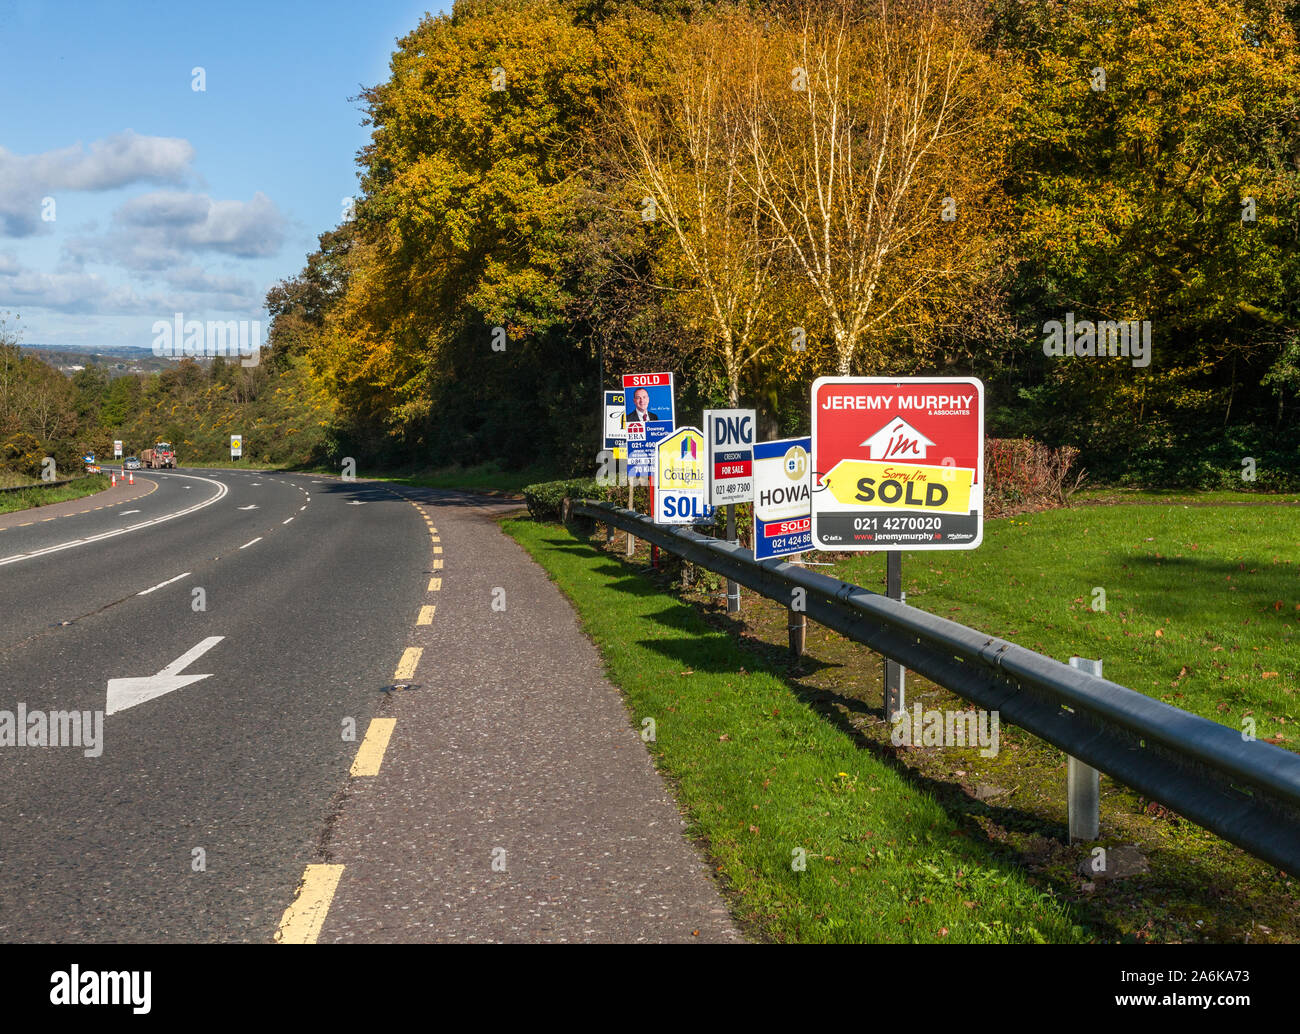 Douglas, Cork, Ireland. 27th October, 2019.  Property for sale notices on the roadway outside Mount Oval in Douglas, Co. Cork, Ireland. - Credit David Stock Photo